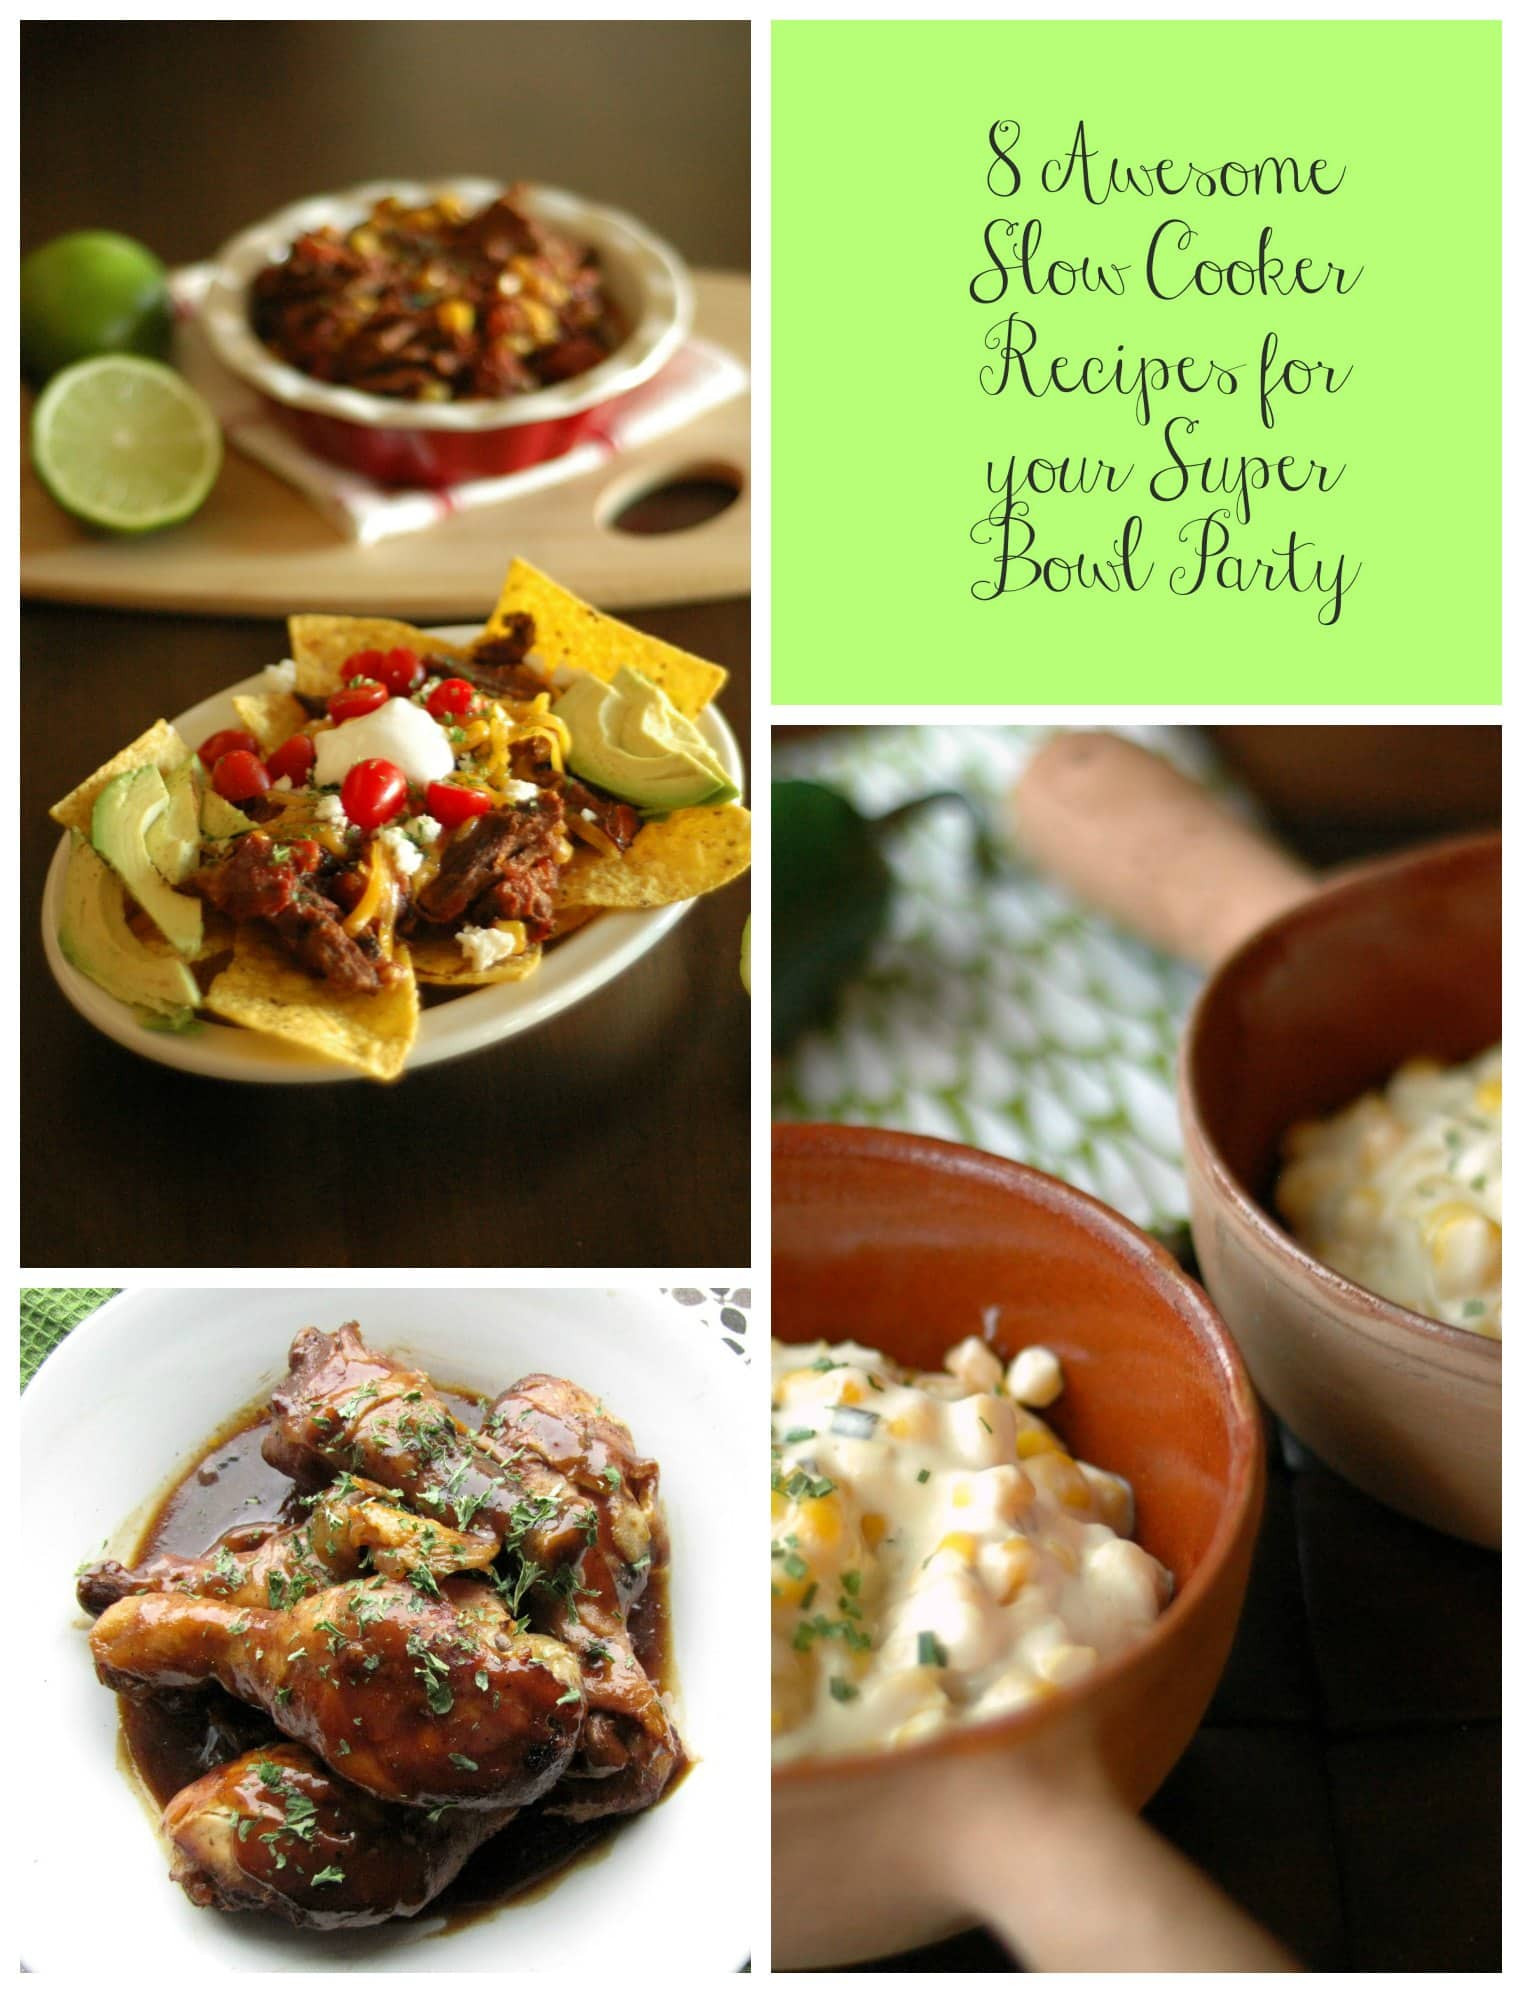 Slow Cooker Super Bowl Recipes
 8 Awesome Slow Cooker Recipes for your Super Bowl Party